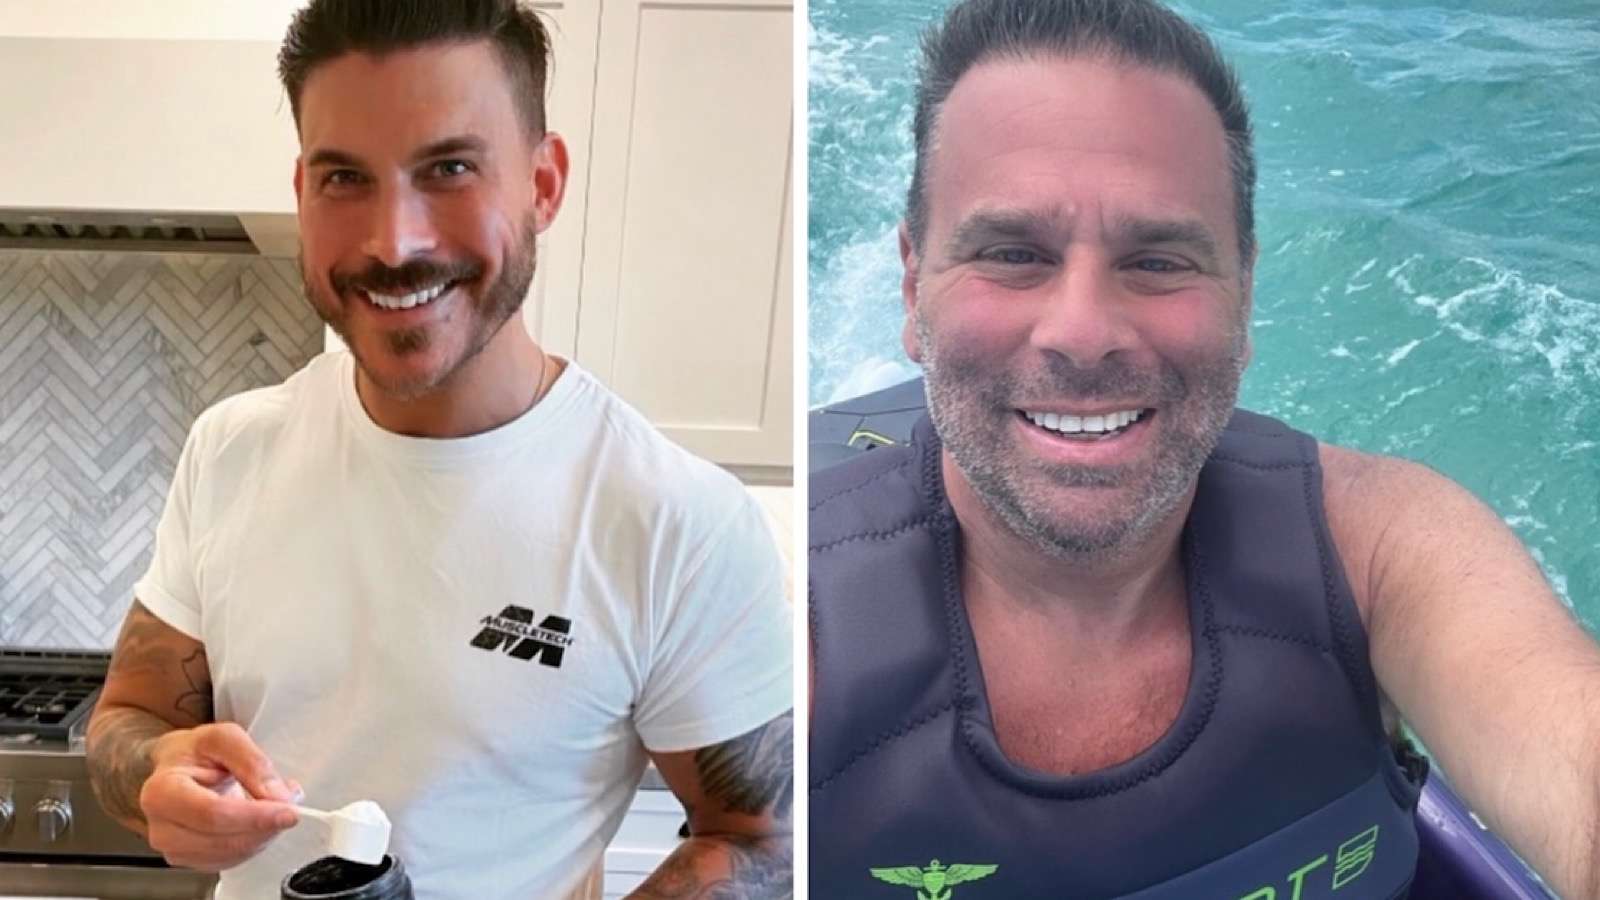 Randal Emmett claimed Jax Taylor was blackmailing him after an investment between the two went south.